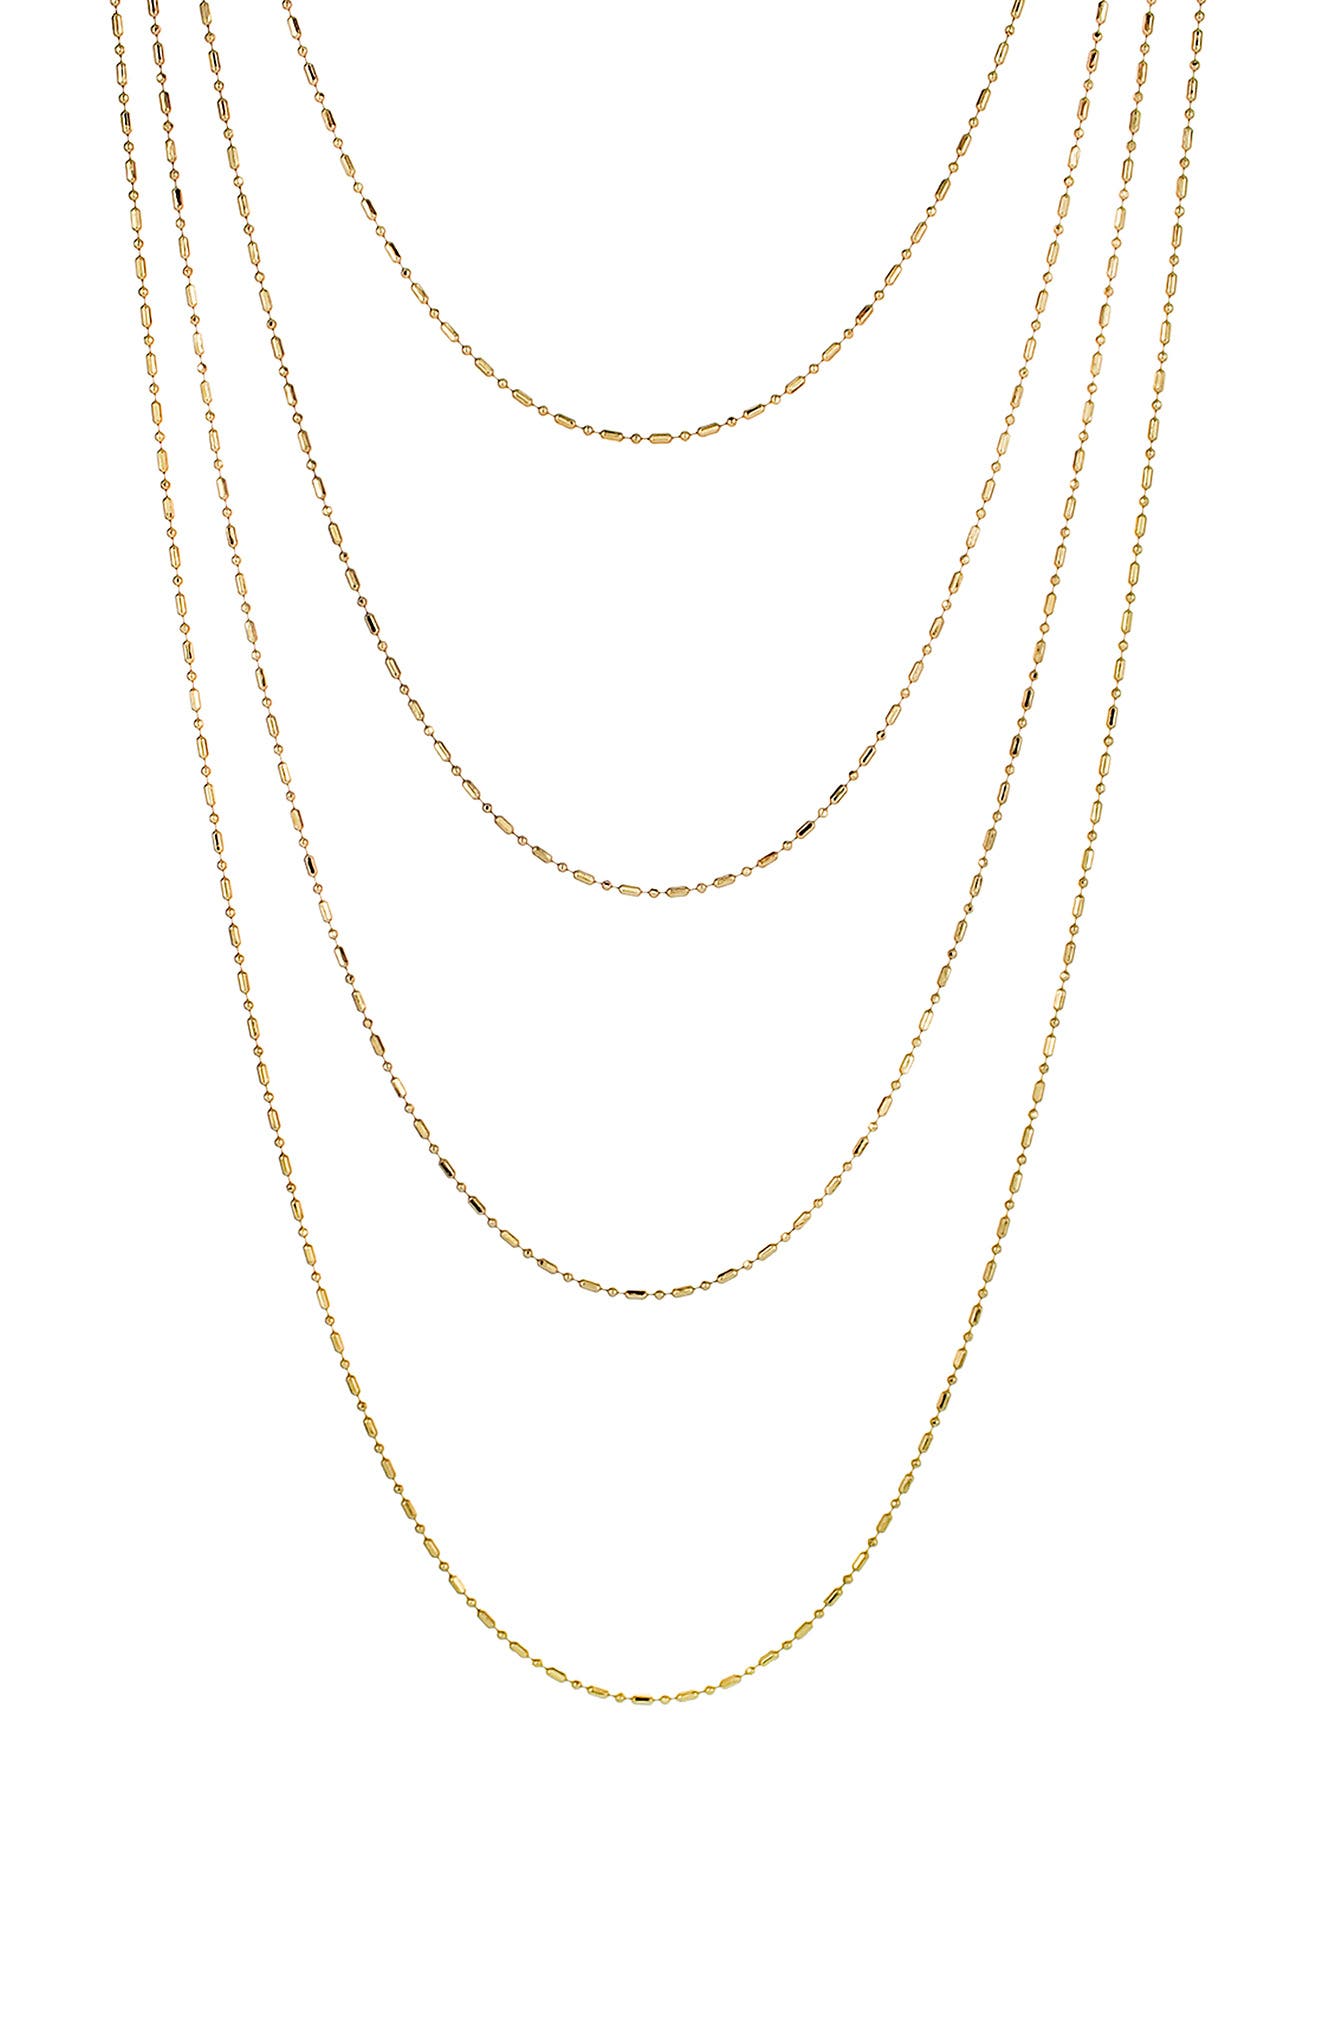 star pendant flow su multi-layer necklace gold necklace